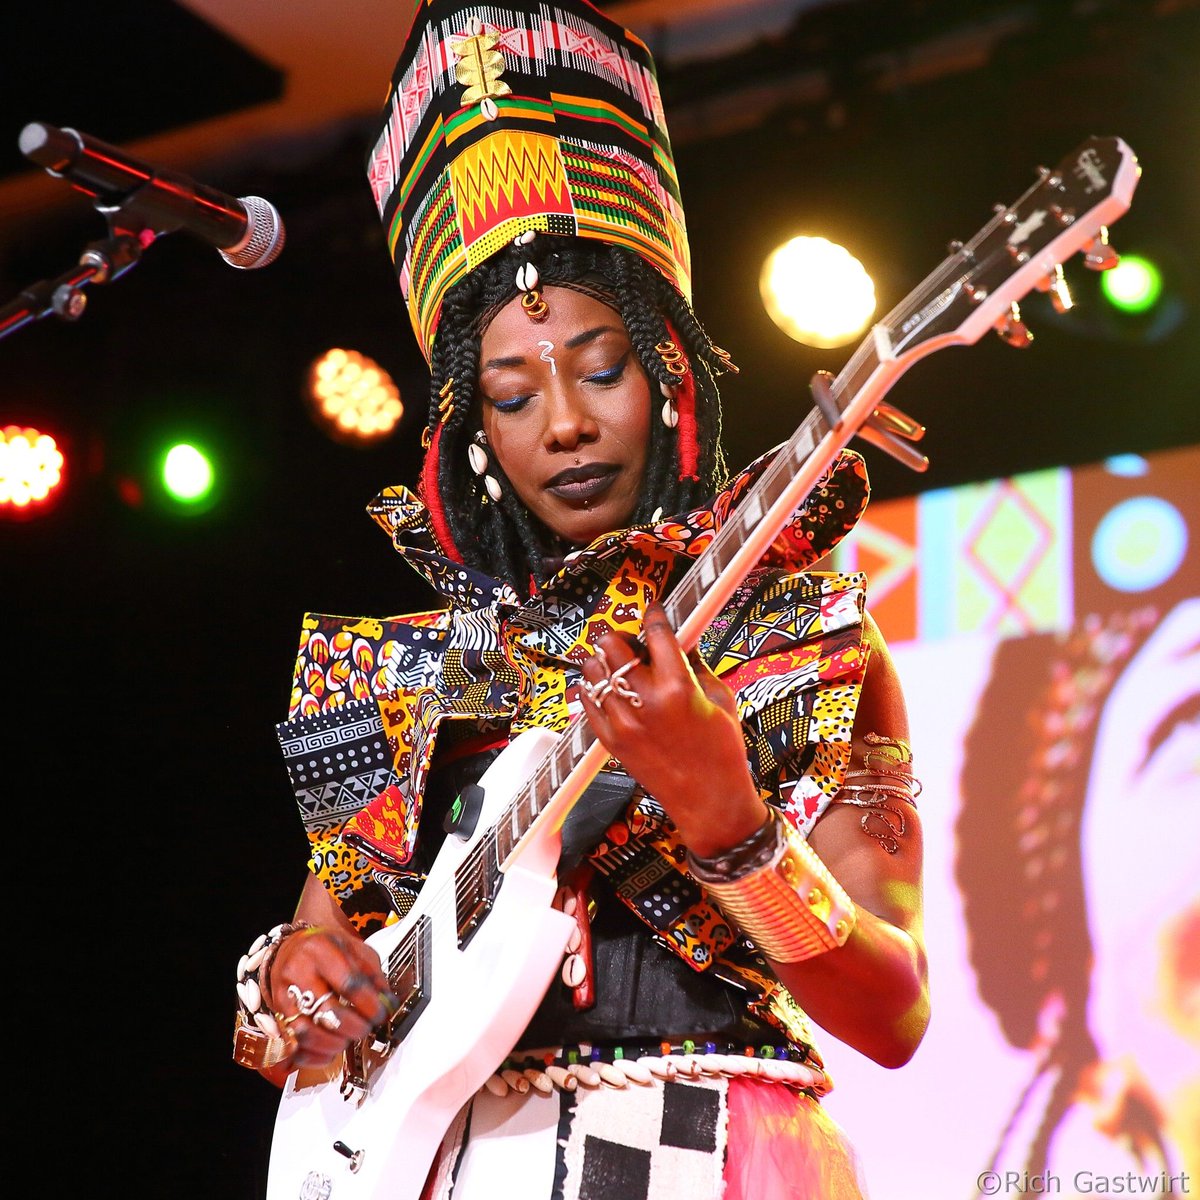 The wonderful Fatoumata Diawara @FatouMusic_ will be performing at @SomersetHouse on 12th July, for 'An Evening in Mali', as part of the Somerset House Summer Series. Tickets available at: ticketmaster.co.uk/an-evening-in-…